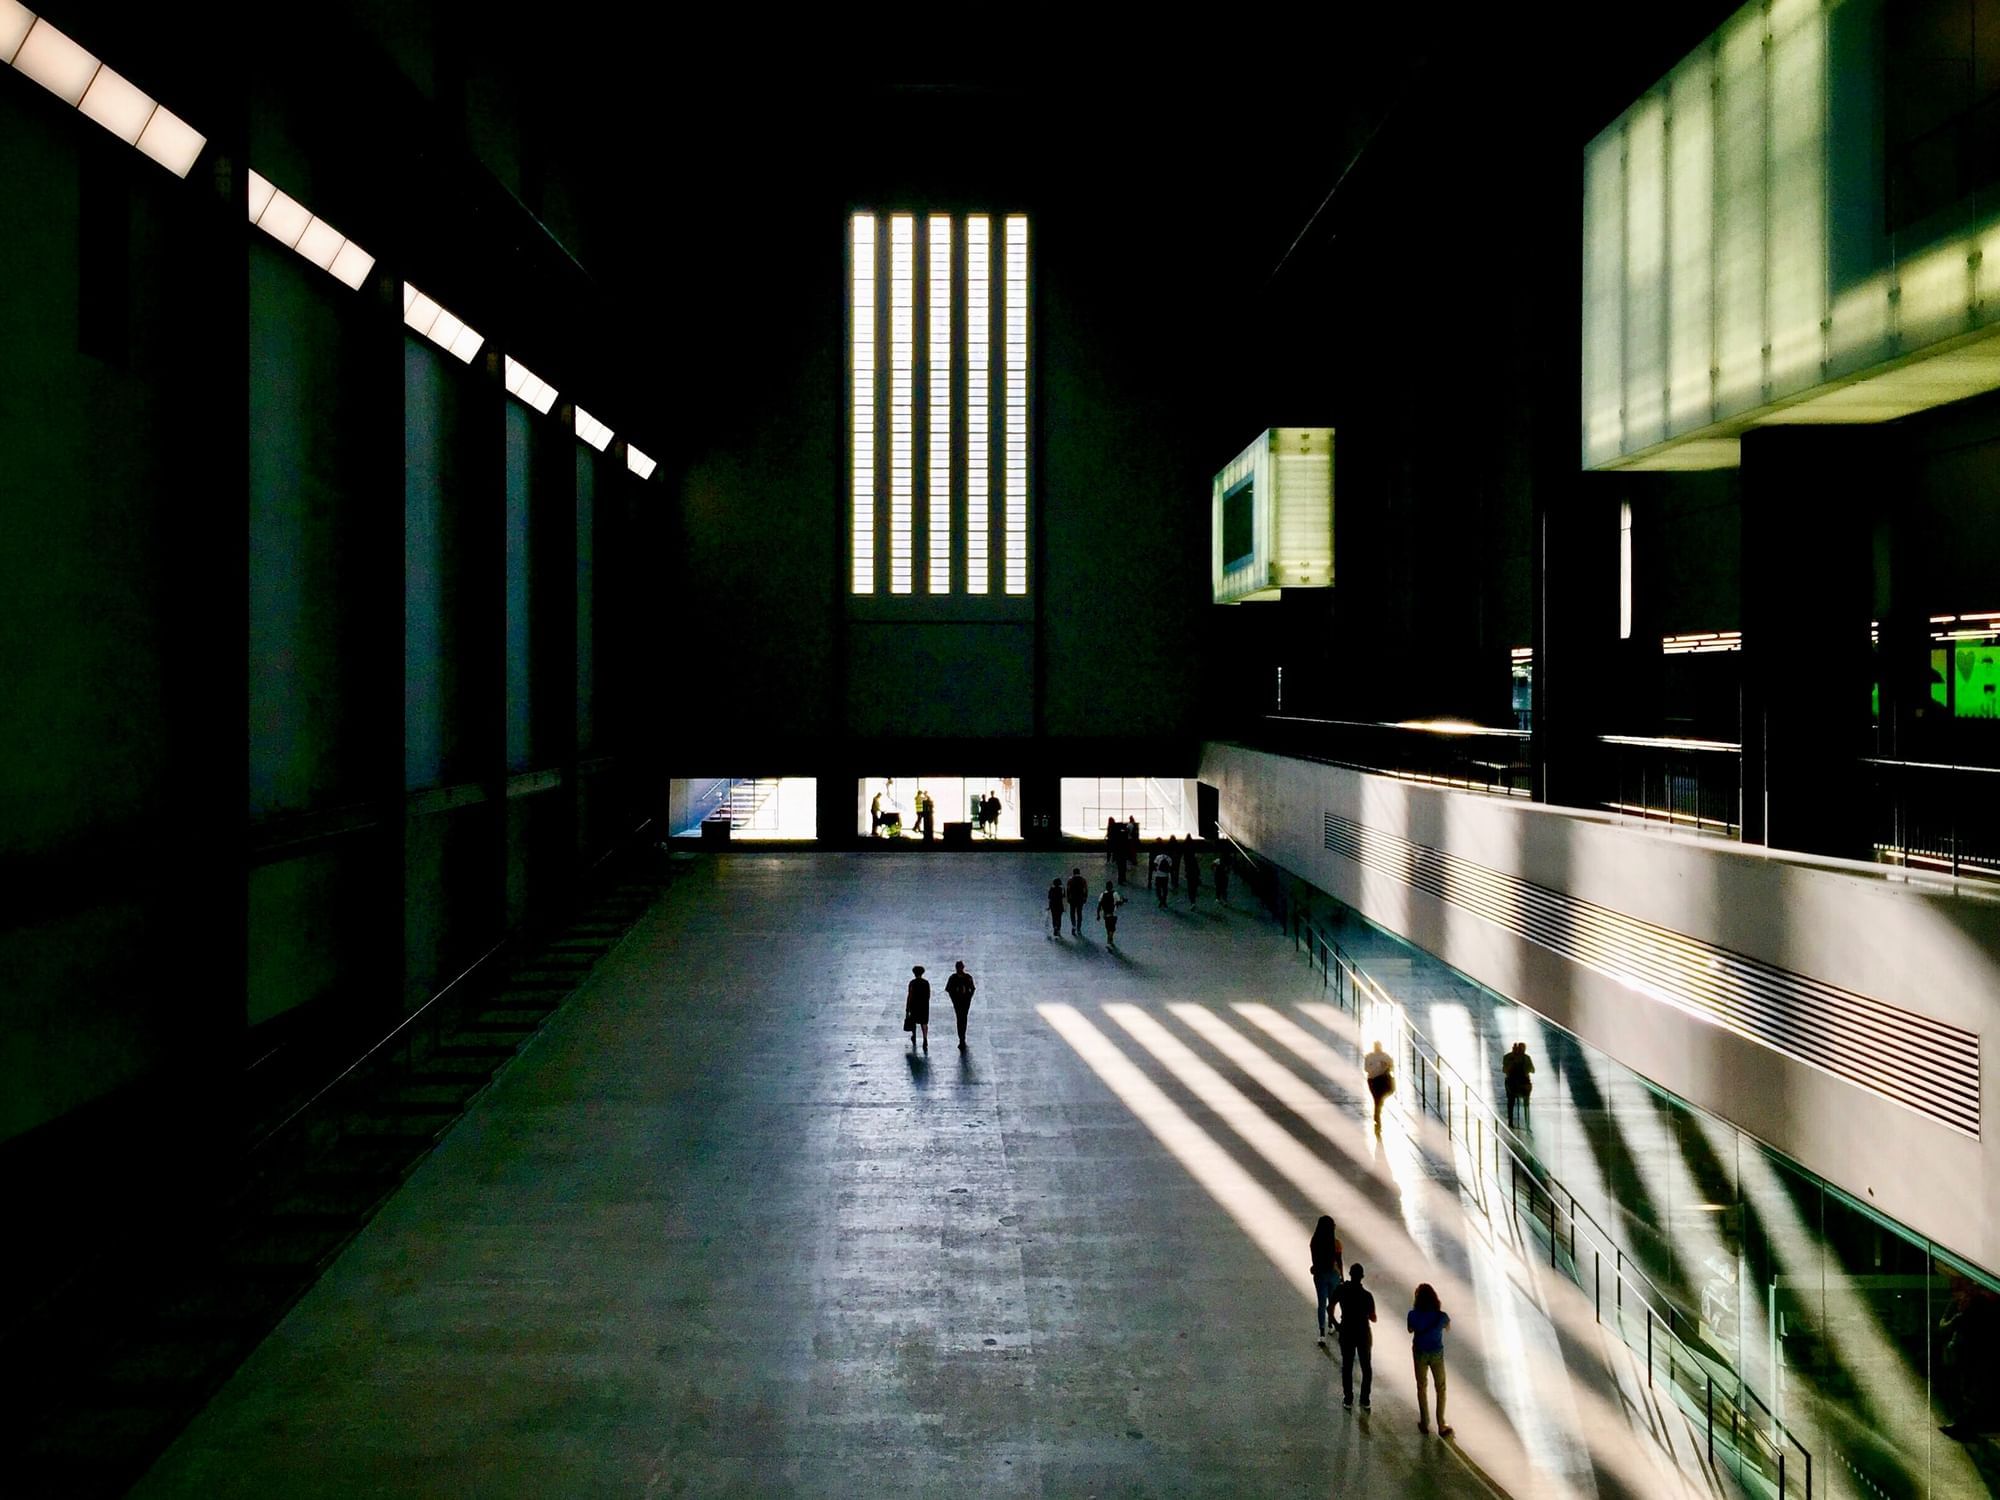 People watching The Tate Modern art gallery at The Londoner